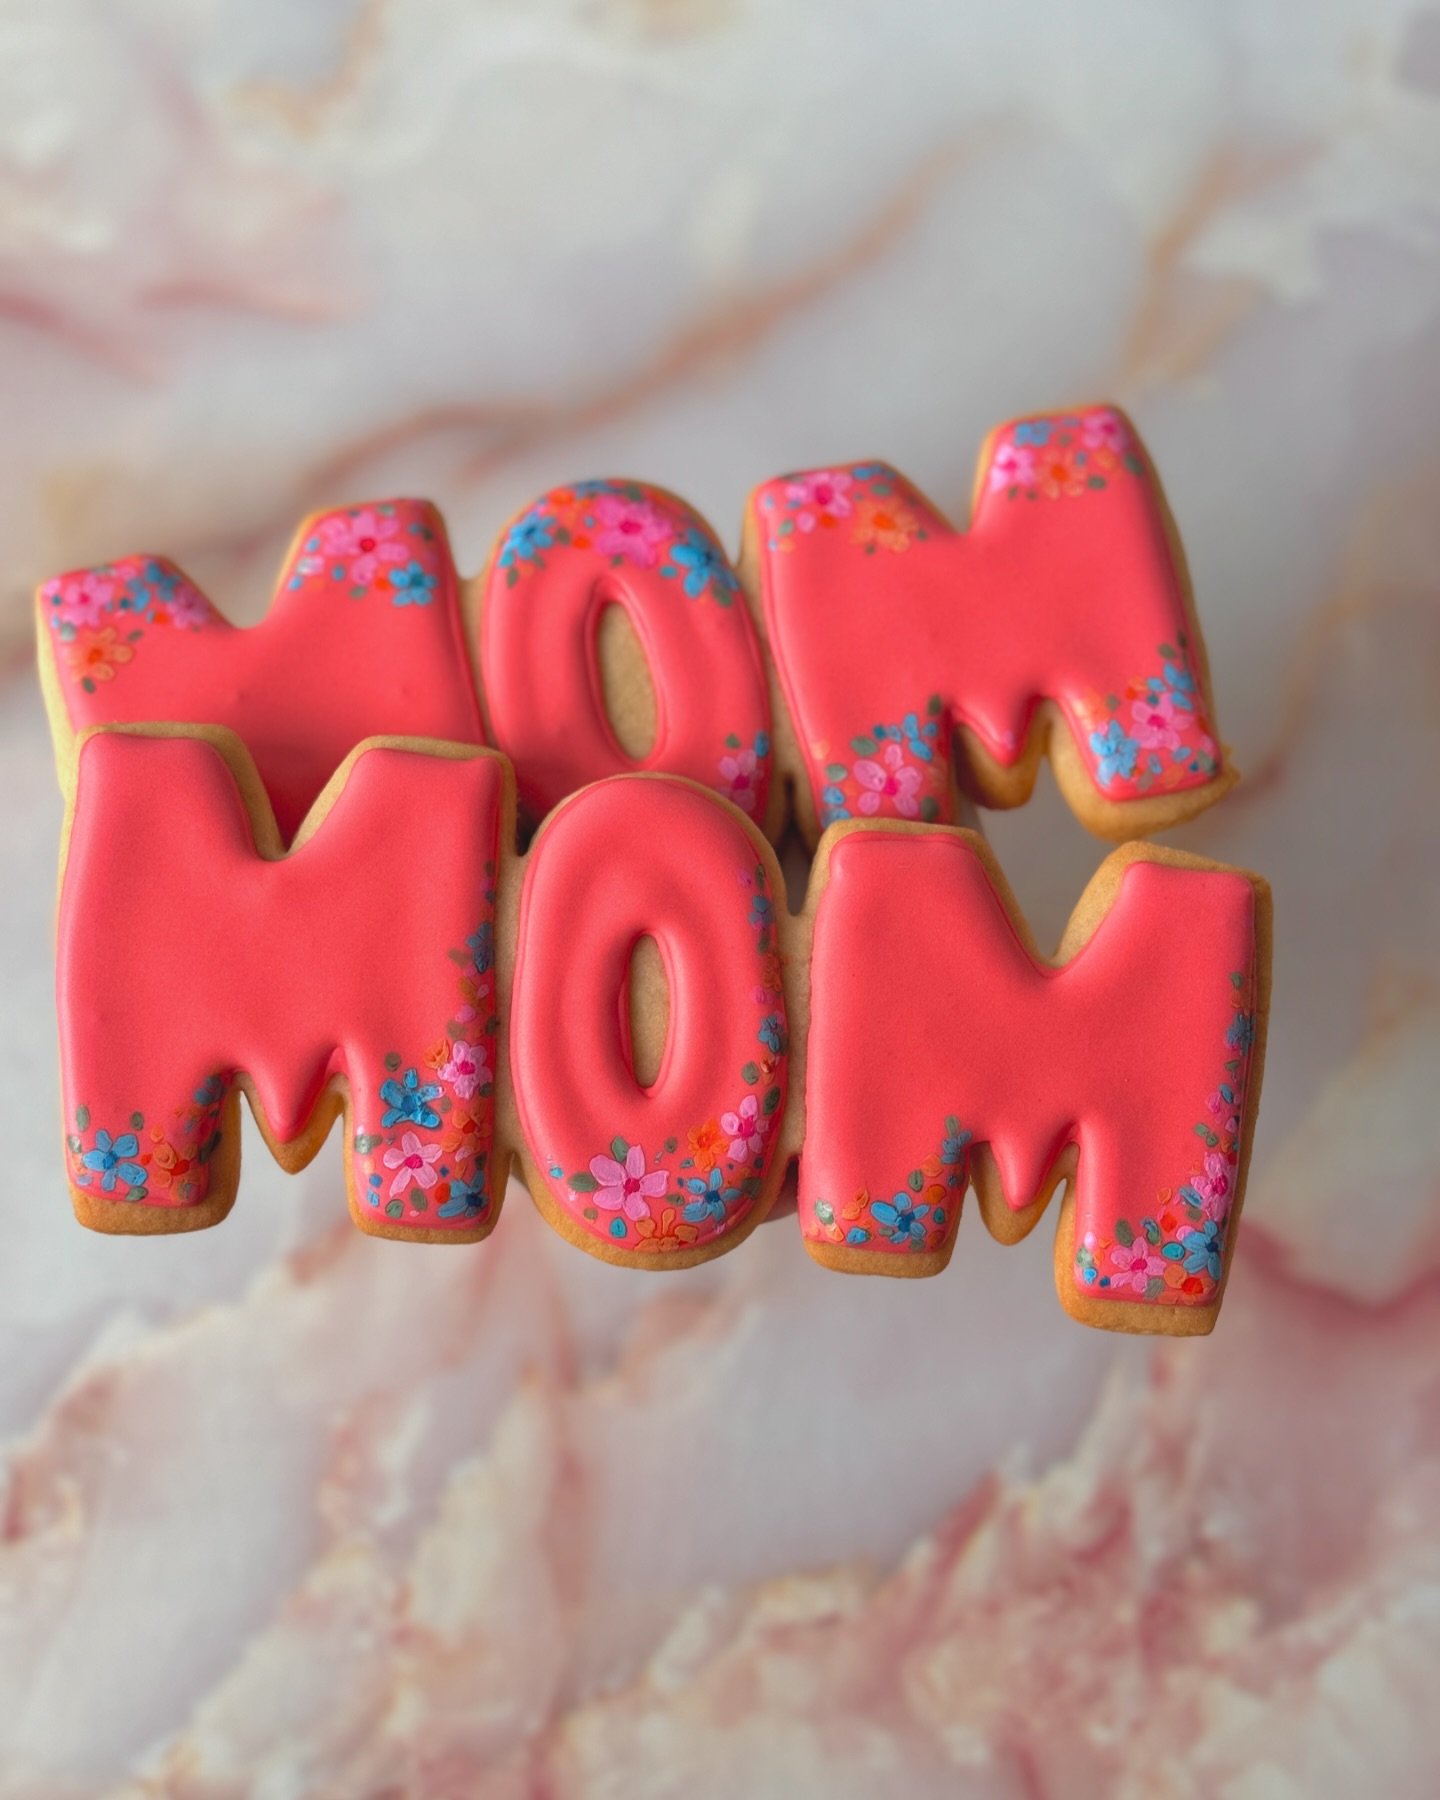 Get Mom some bright, beautiful cookies to match her bright, beautiful personality✨💗

Just one week left to place your Mother&rsquo;s Day orders! You can place orders via email, or anytime during business hours over the phone or in person☺️